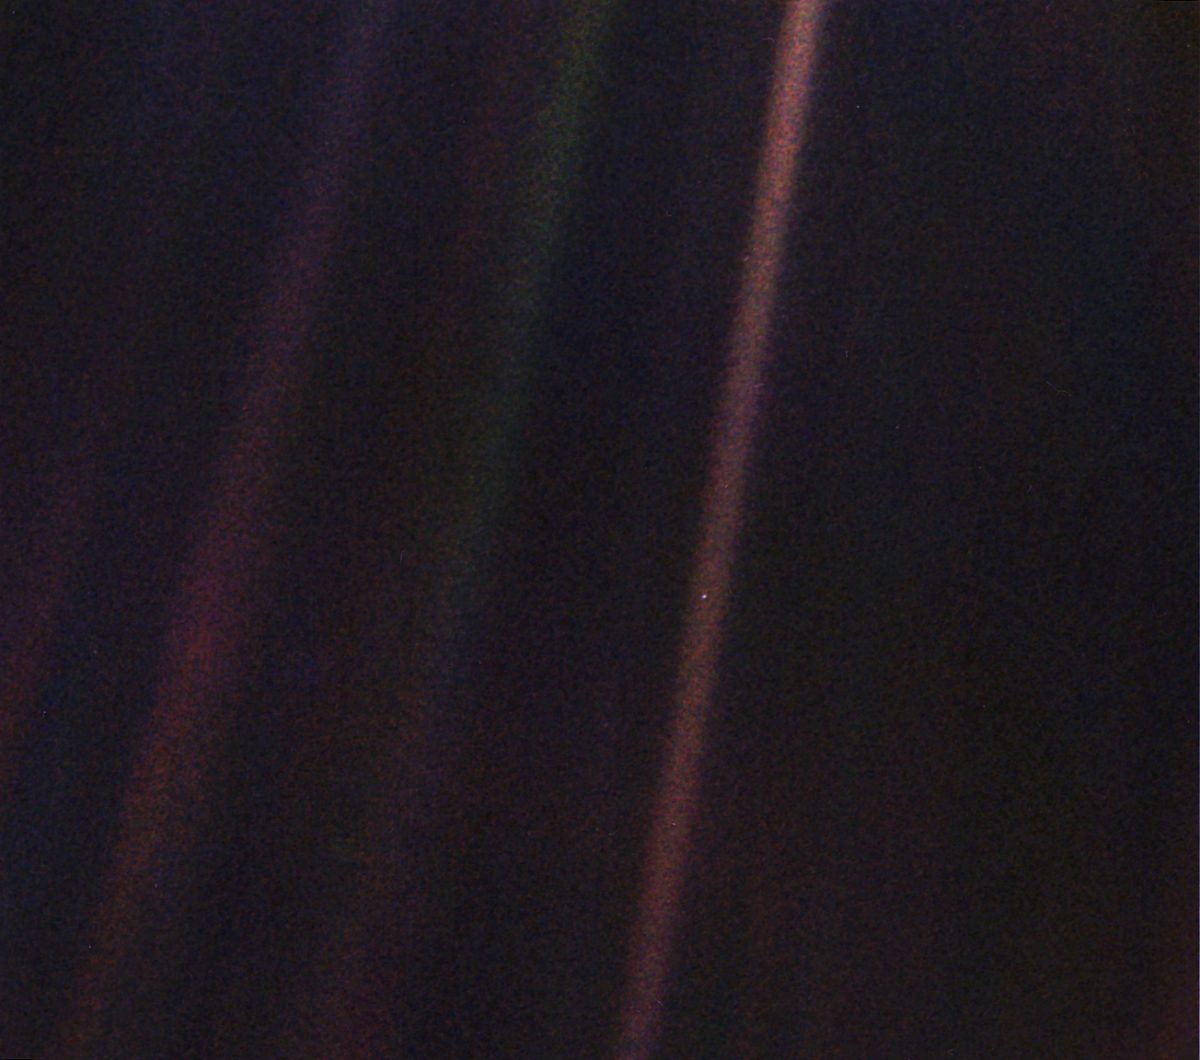 Photo of the Earth inside a sunray taken from voyager 1 at 3.7 billion miles from Earth.
Photo Provided By NASA/JPL-Caltech